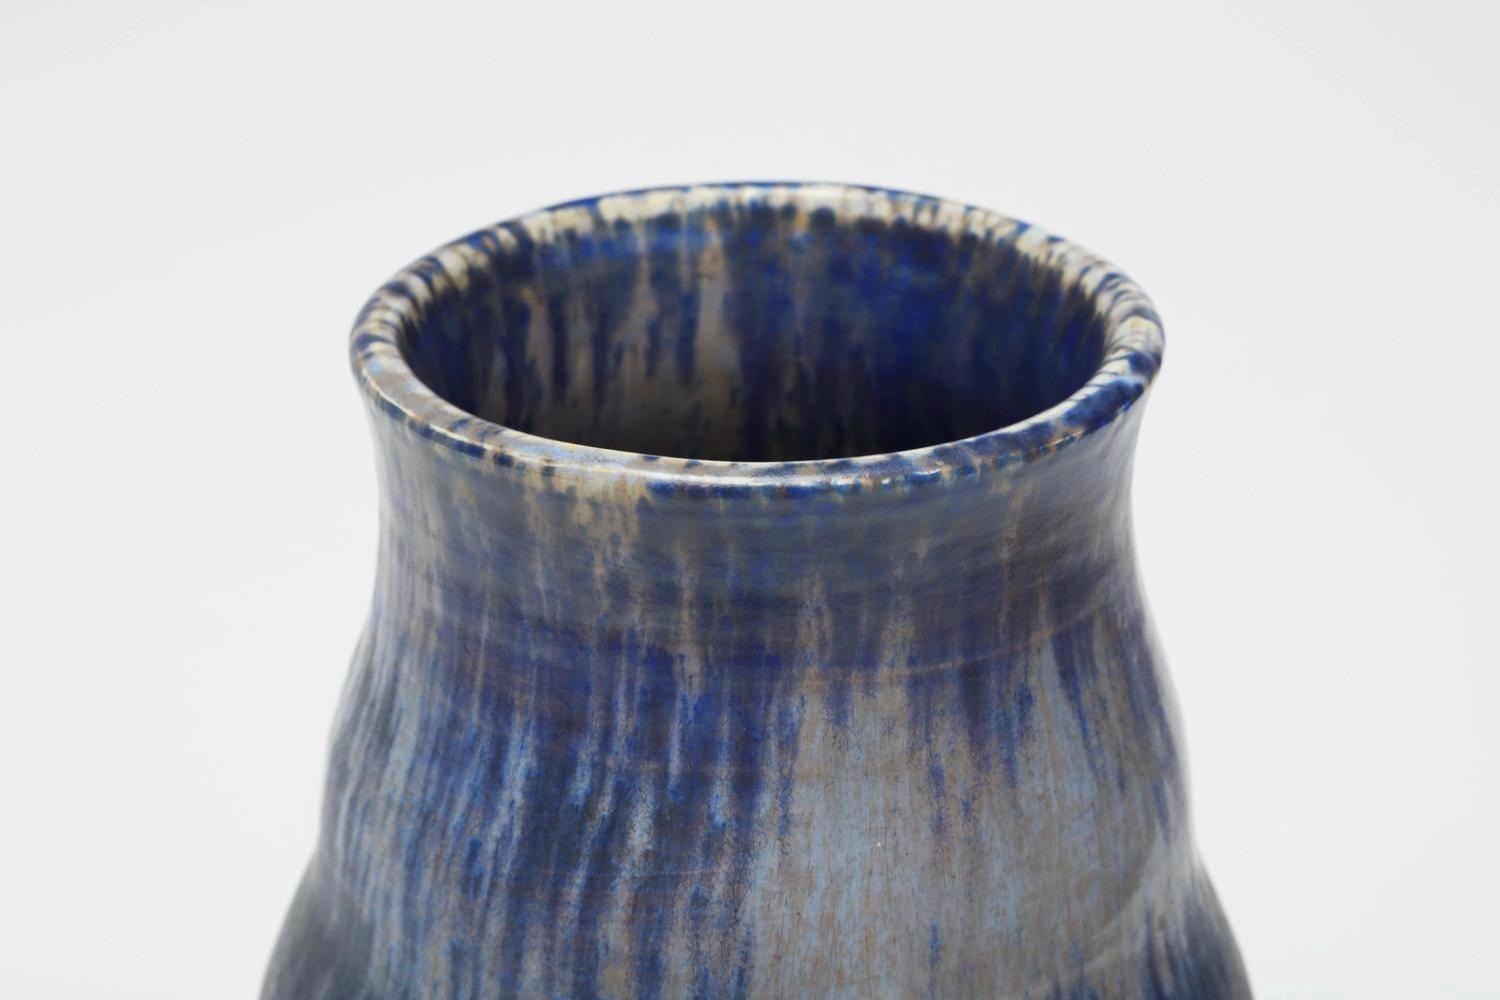 Ruskin Pottery ceramic vase is made of hand thrown drip glazed stoneware. Impressed signature and date to underside: [Ruskin England 1927].

About the studio:
